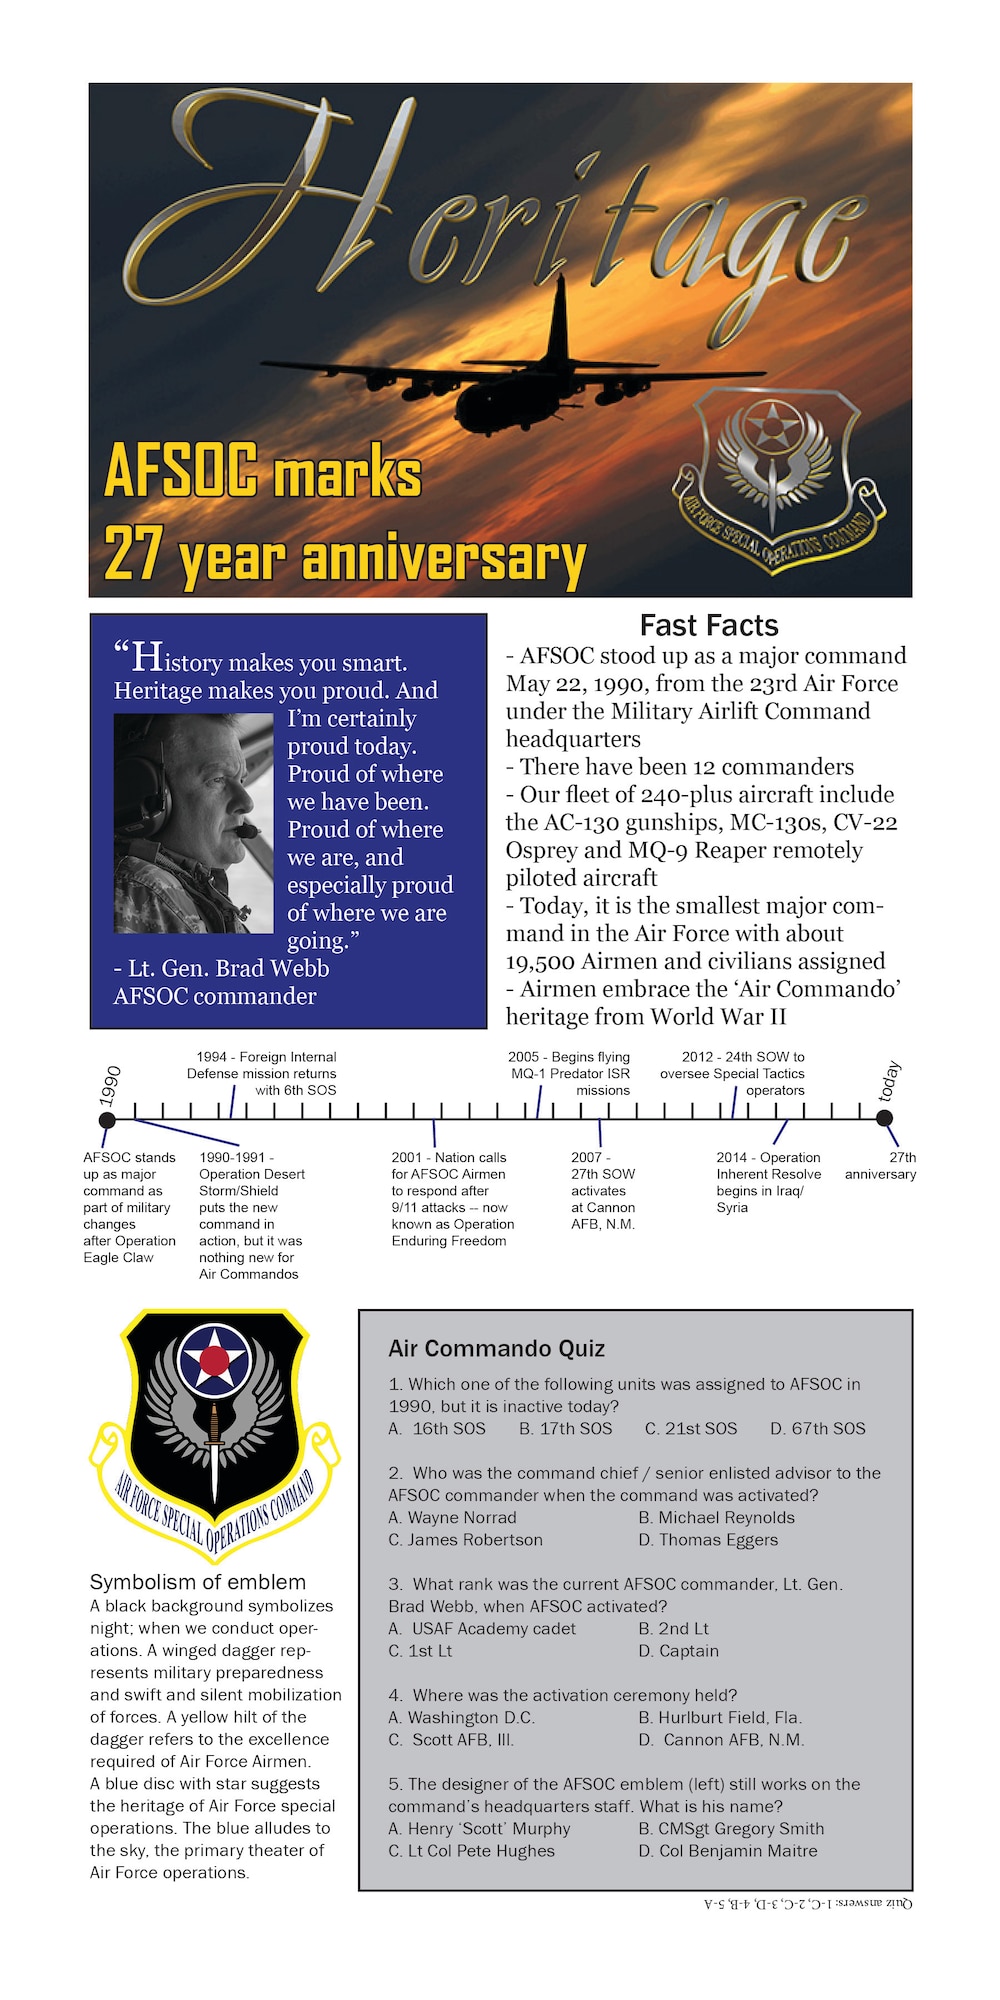 Learn more about the Air Force Special Operations Command, which stood up May 22, 1990.